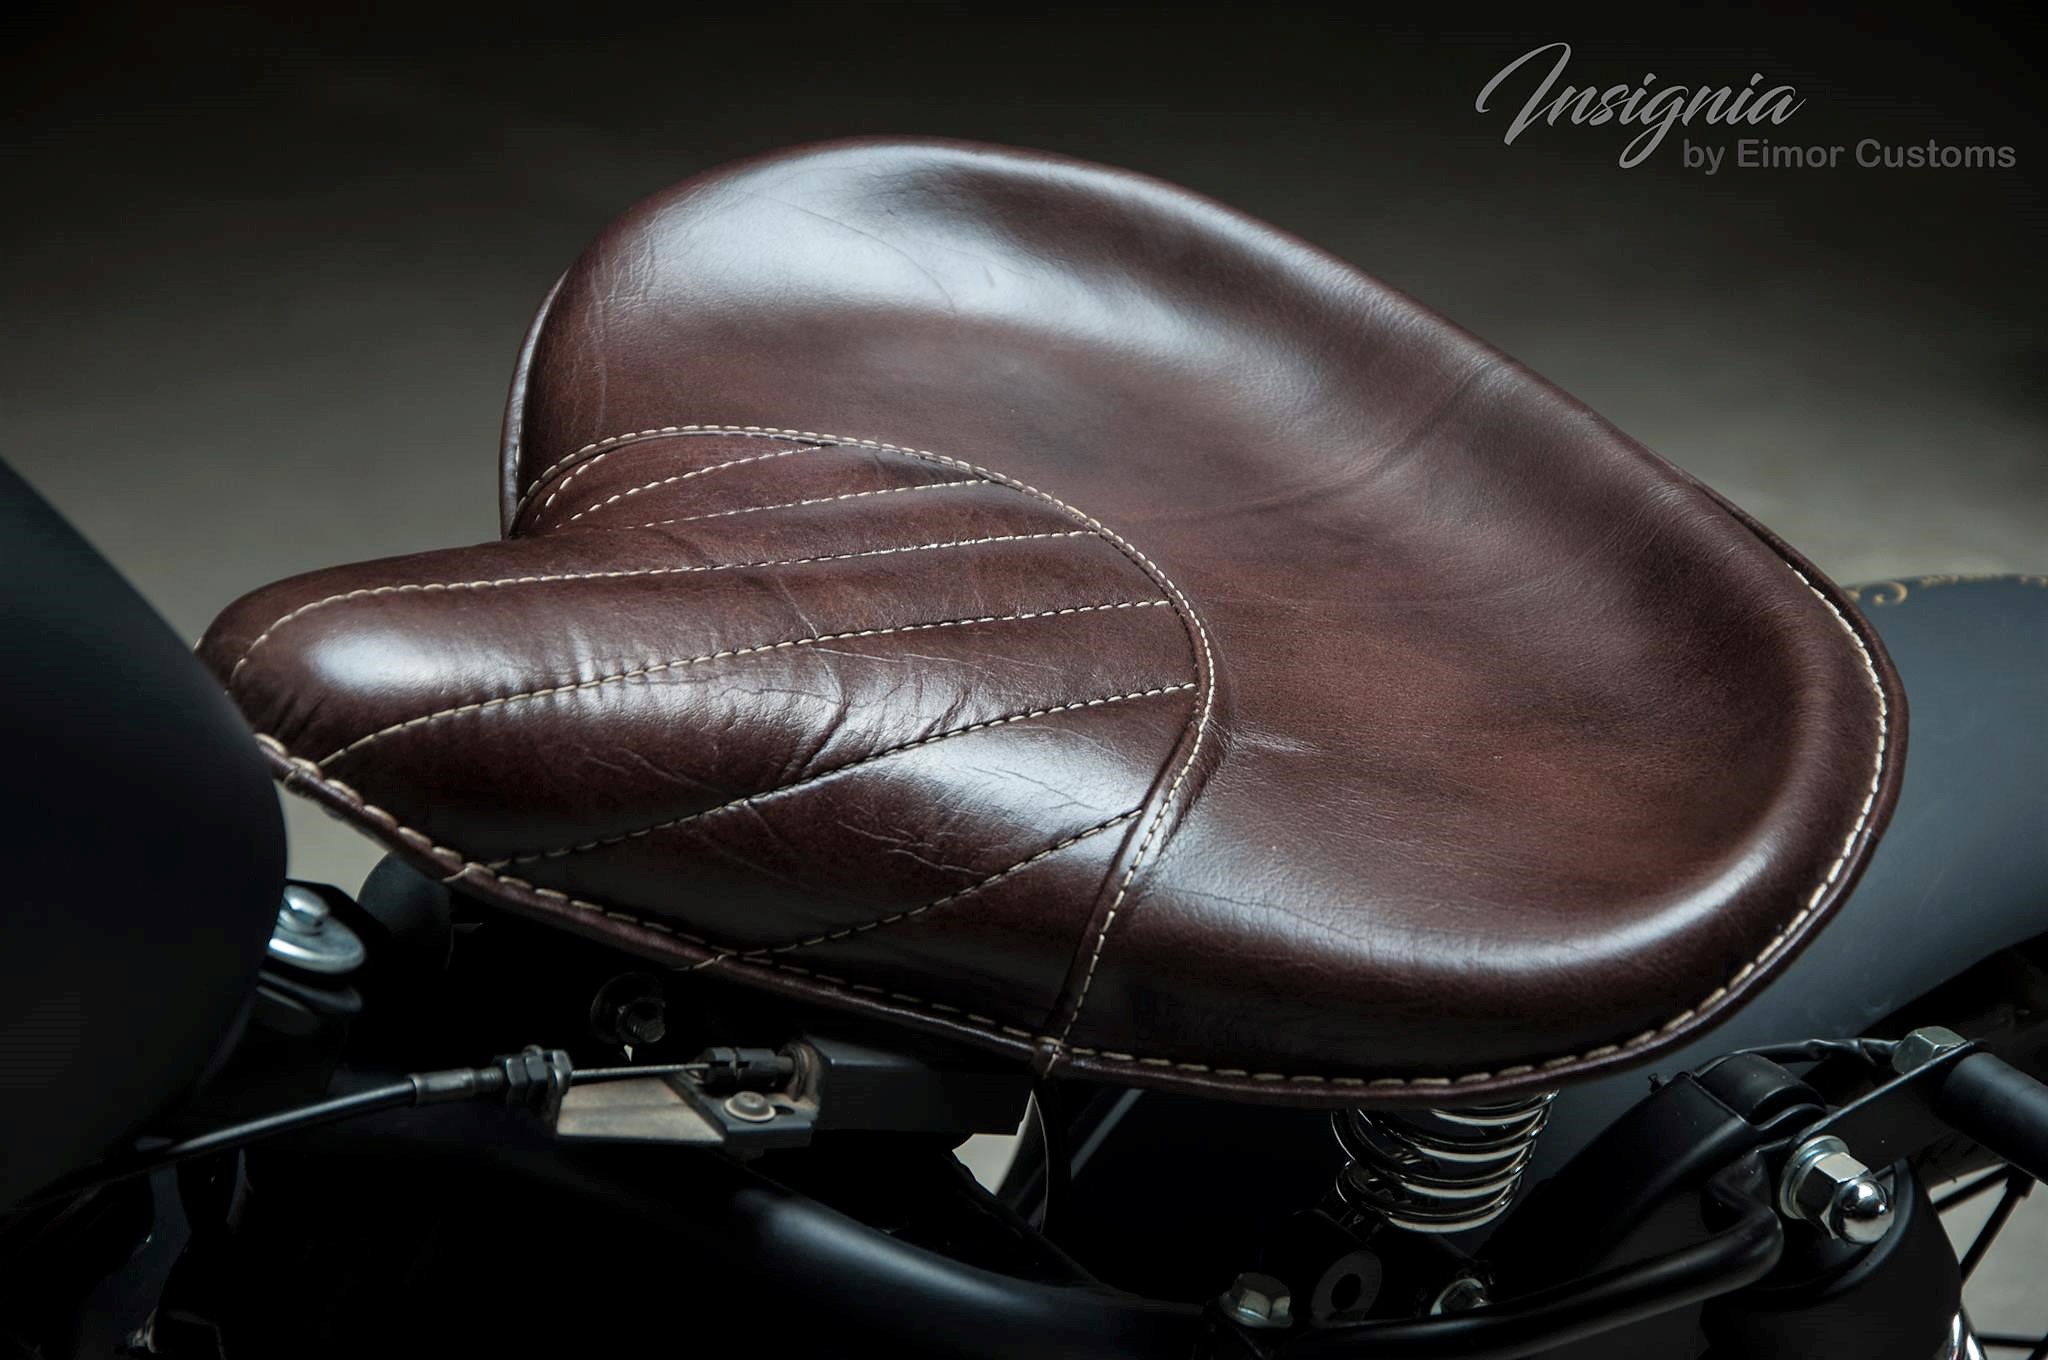 Royal Enfield Classic 350 Insignia Edition Details and Photos - shot